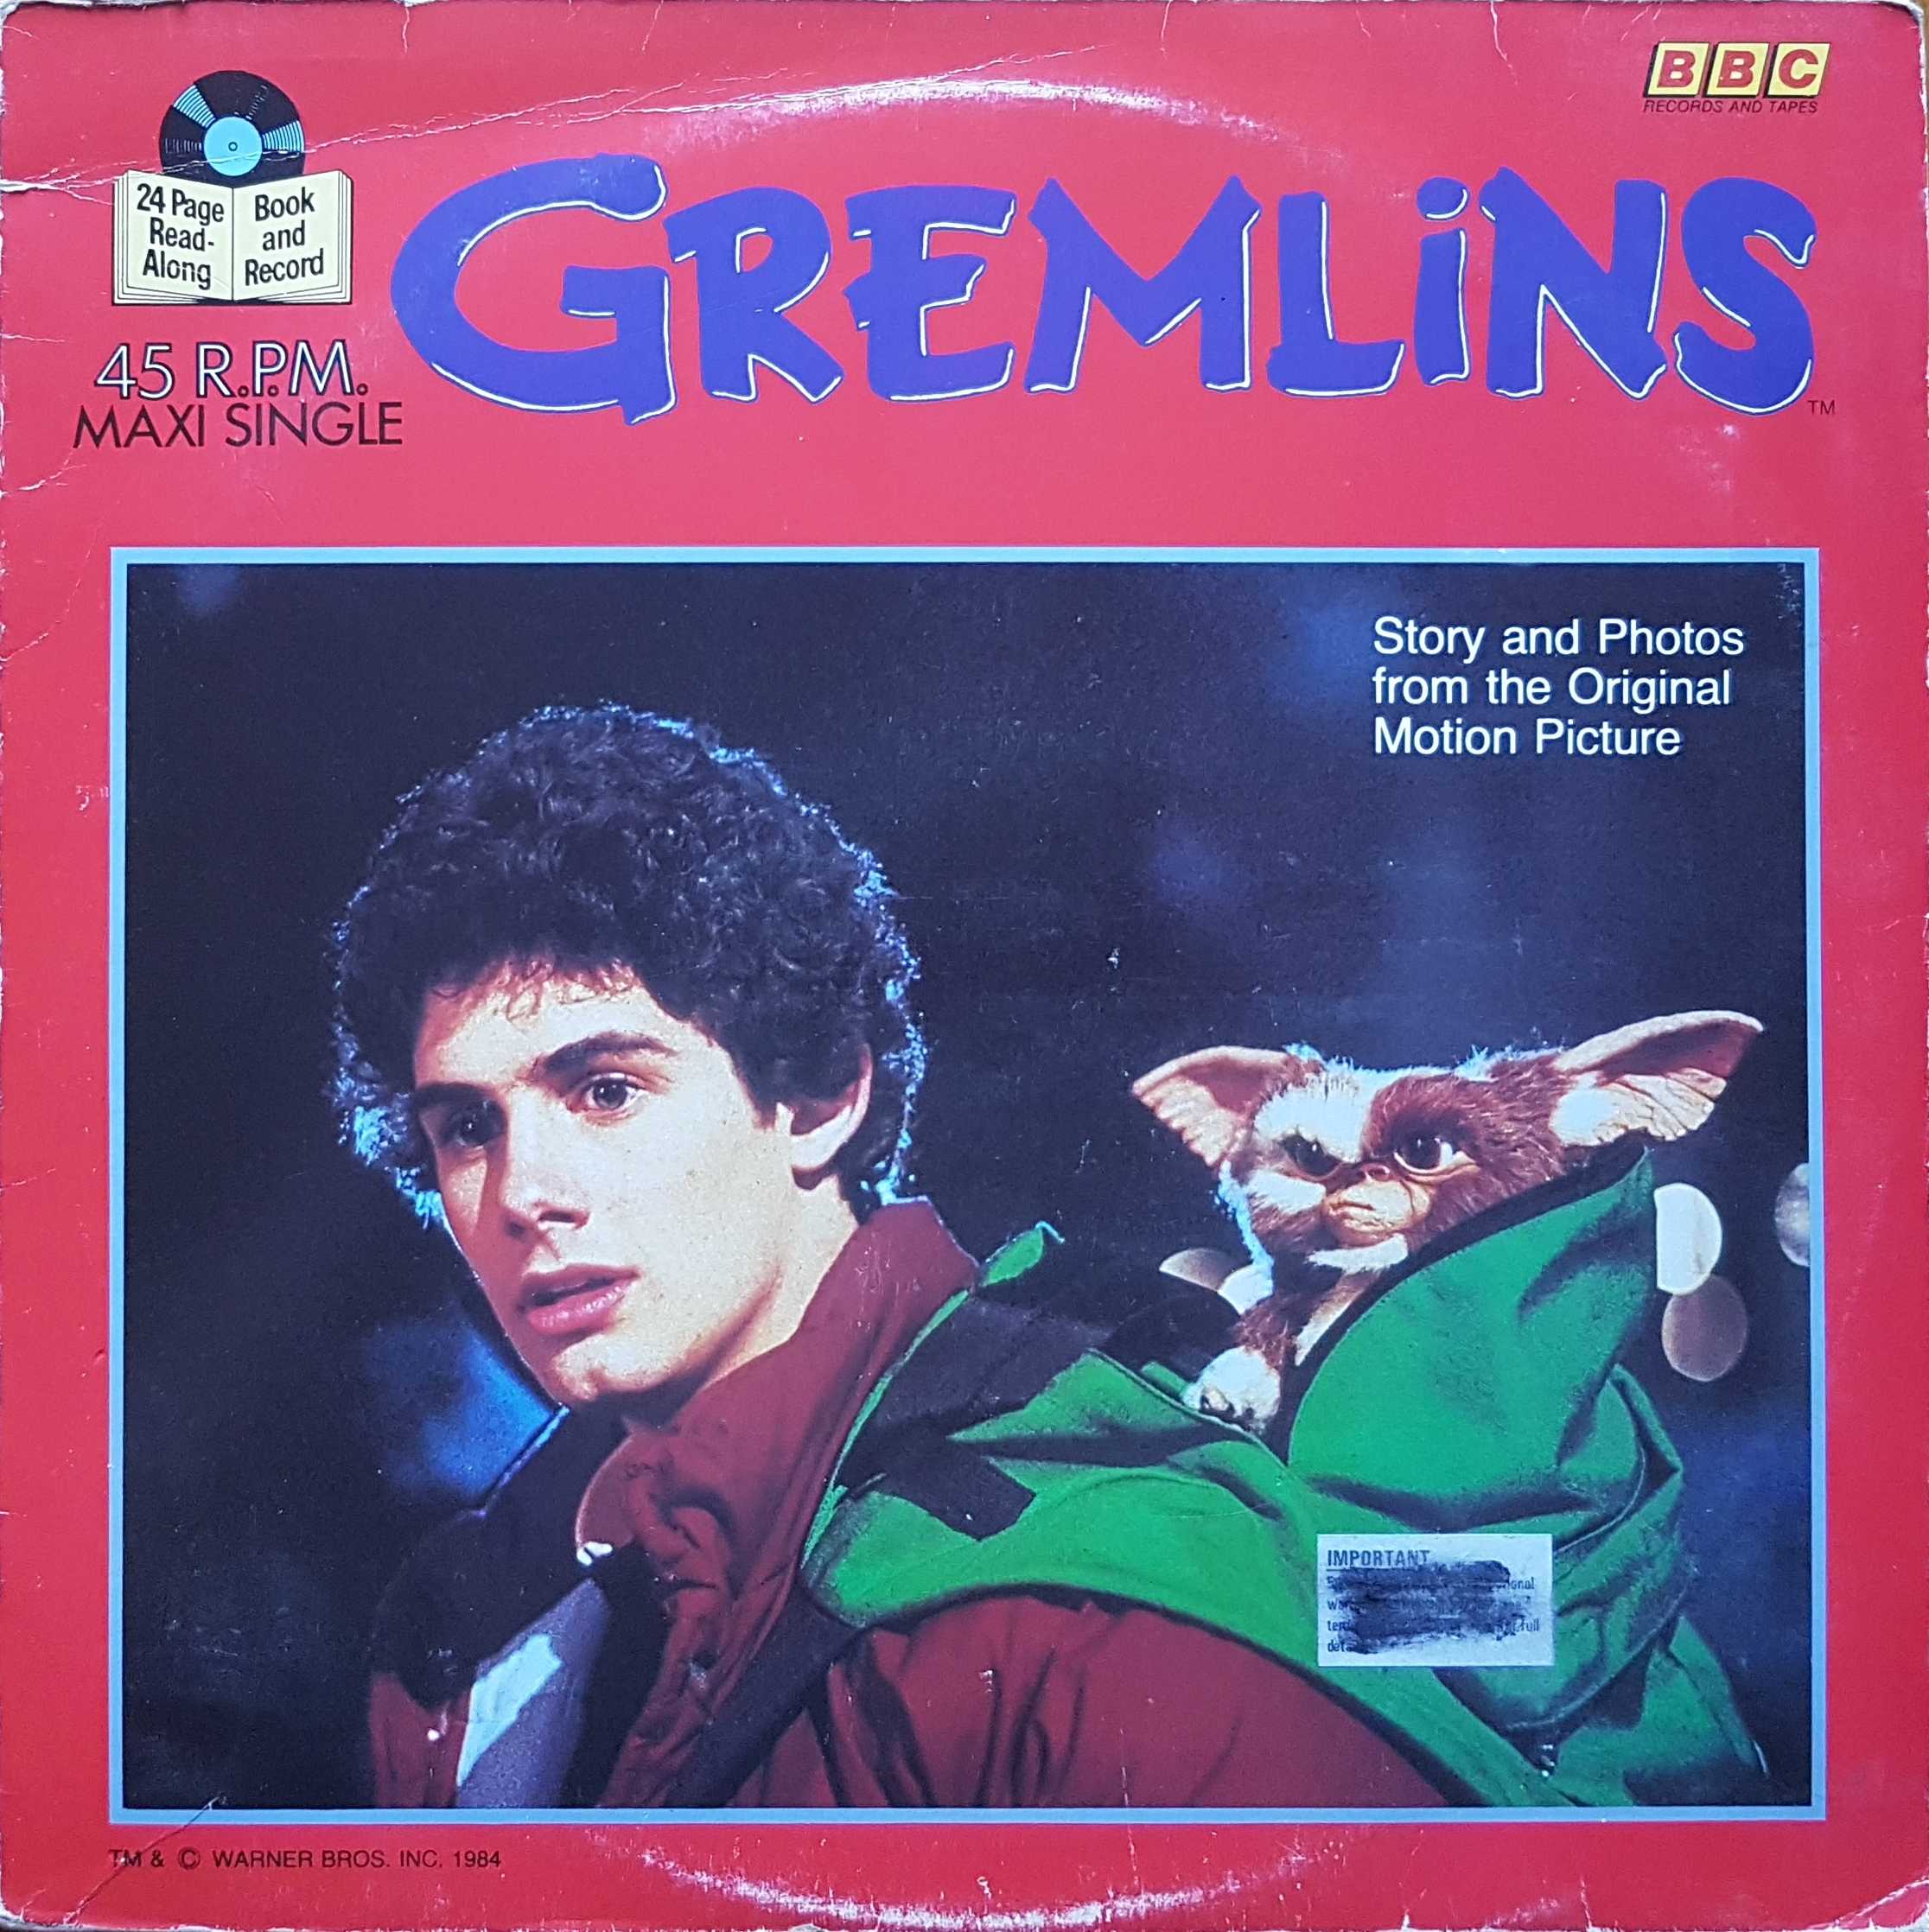 Picture of Gremlins by artist Unknown from the BBC 12inches - Records and Tapes library